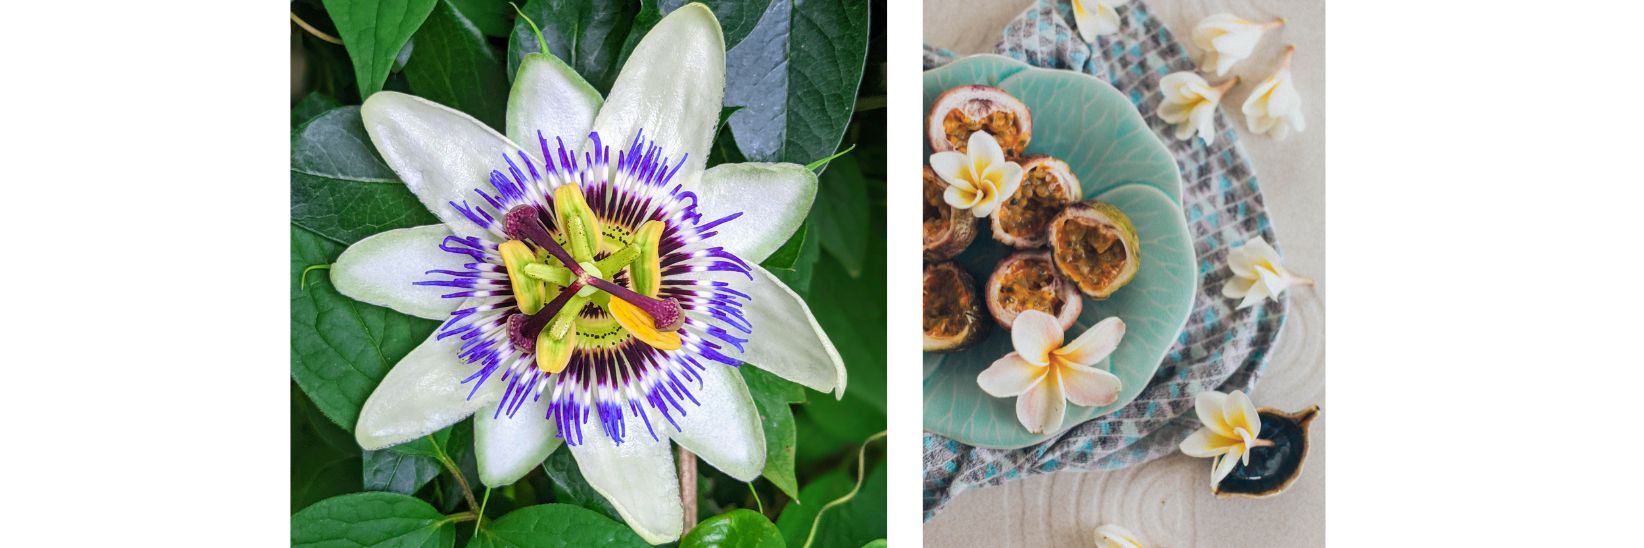 7 fruit Trees to grow Indoors -  Passion fruit